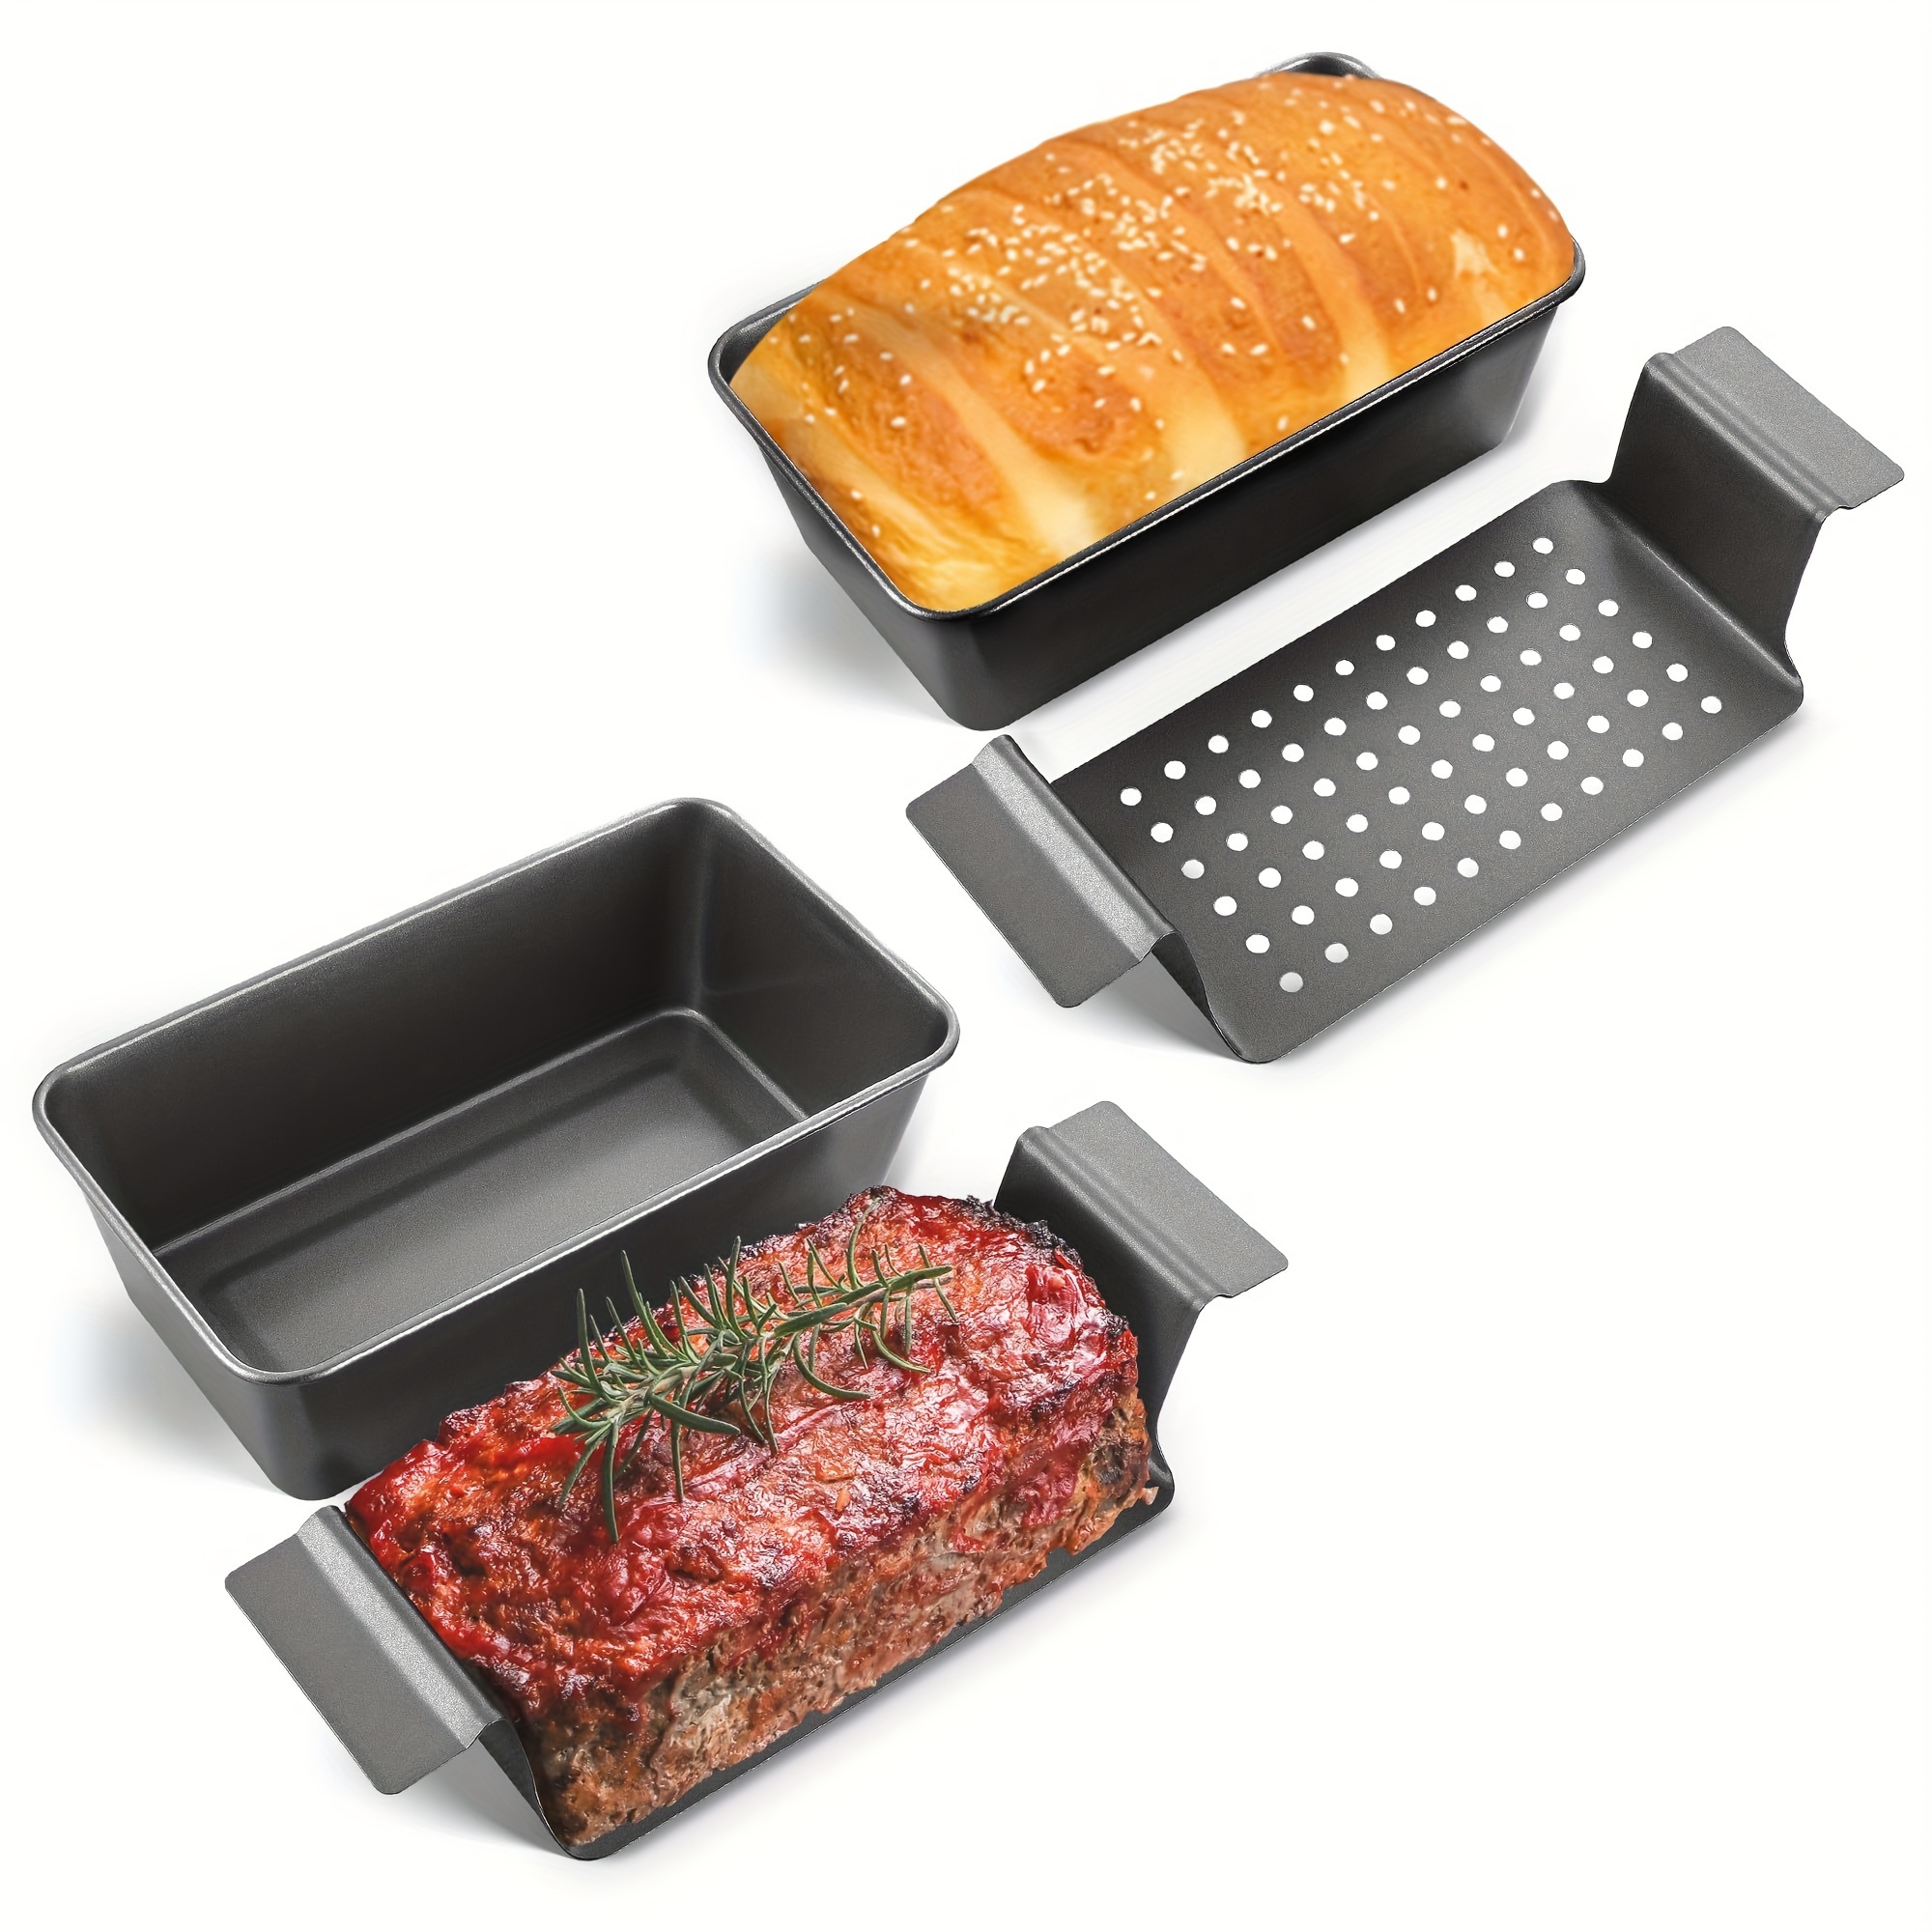 

Hongbake 4 Pack Meatloaf Pan With Drain Tray, 9 X 5 Inches Loaf Pans With Insert, Nonstick For Baking, Grey